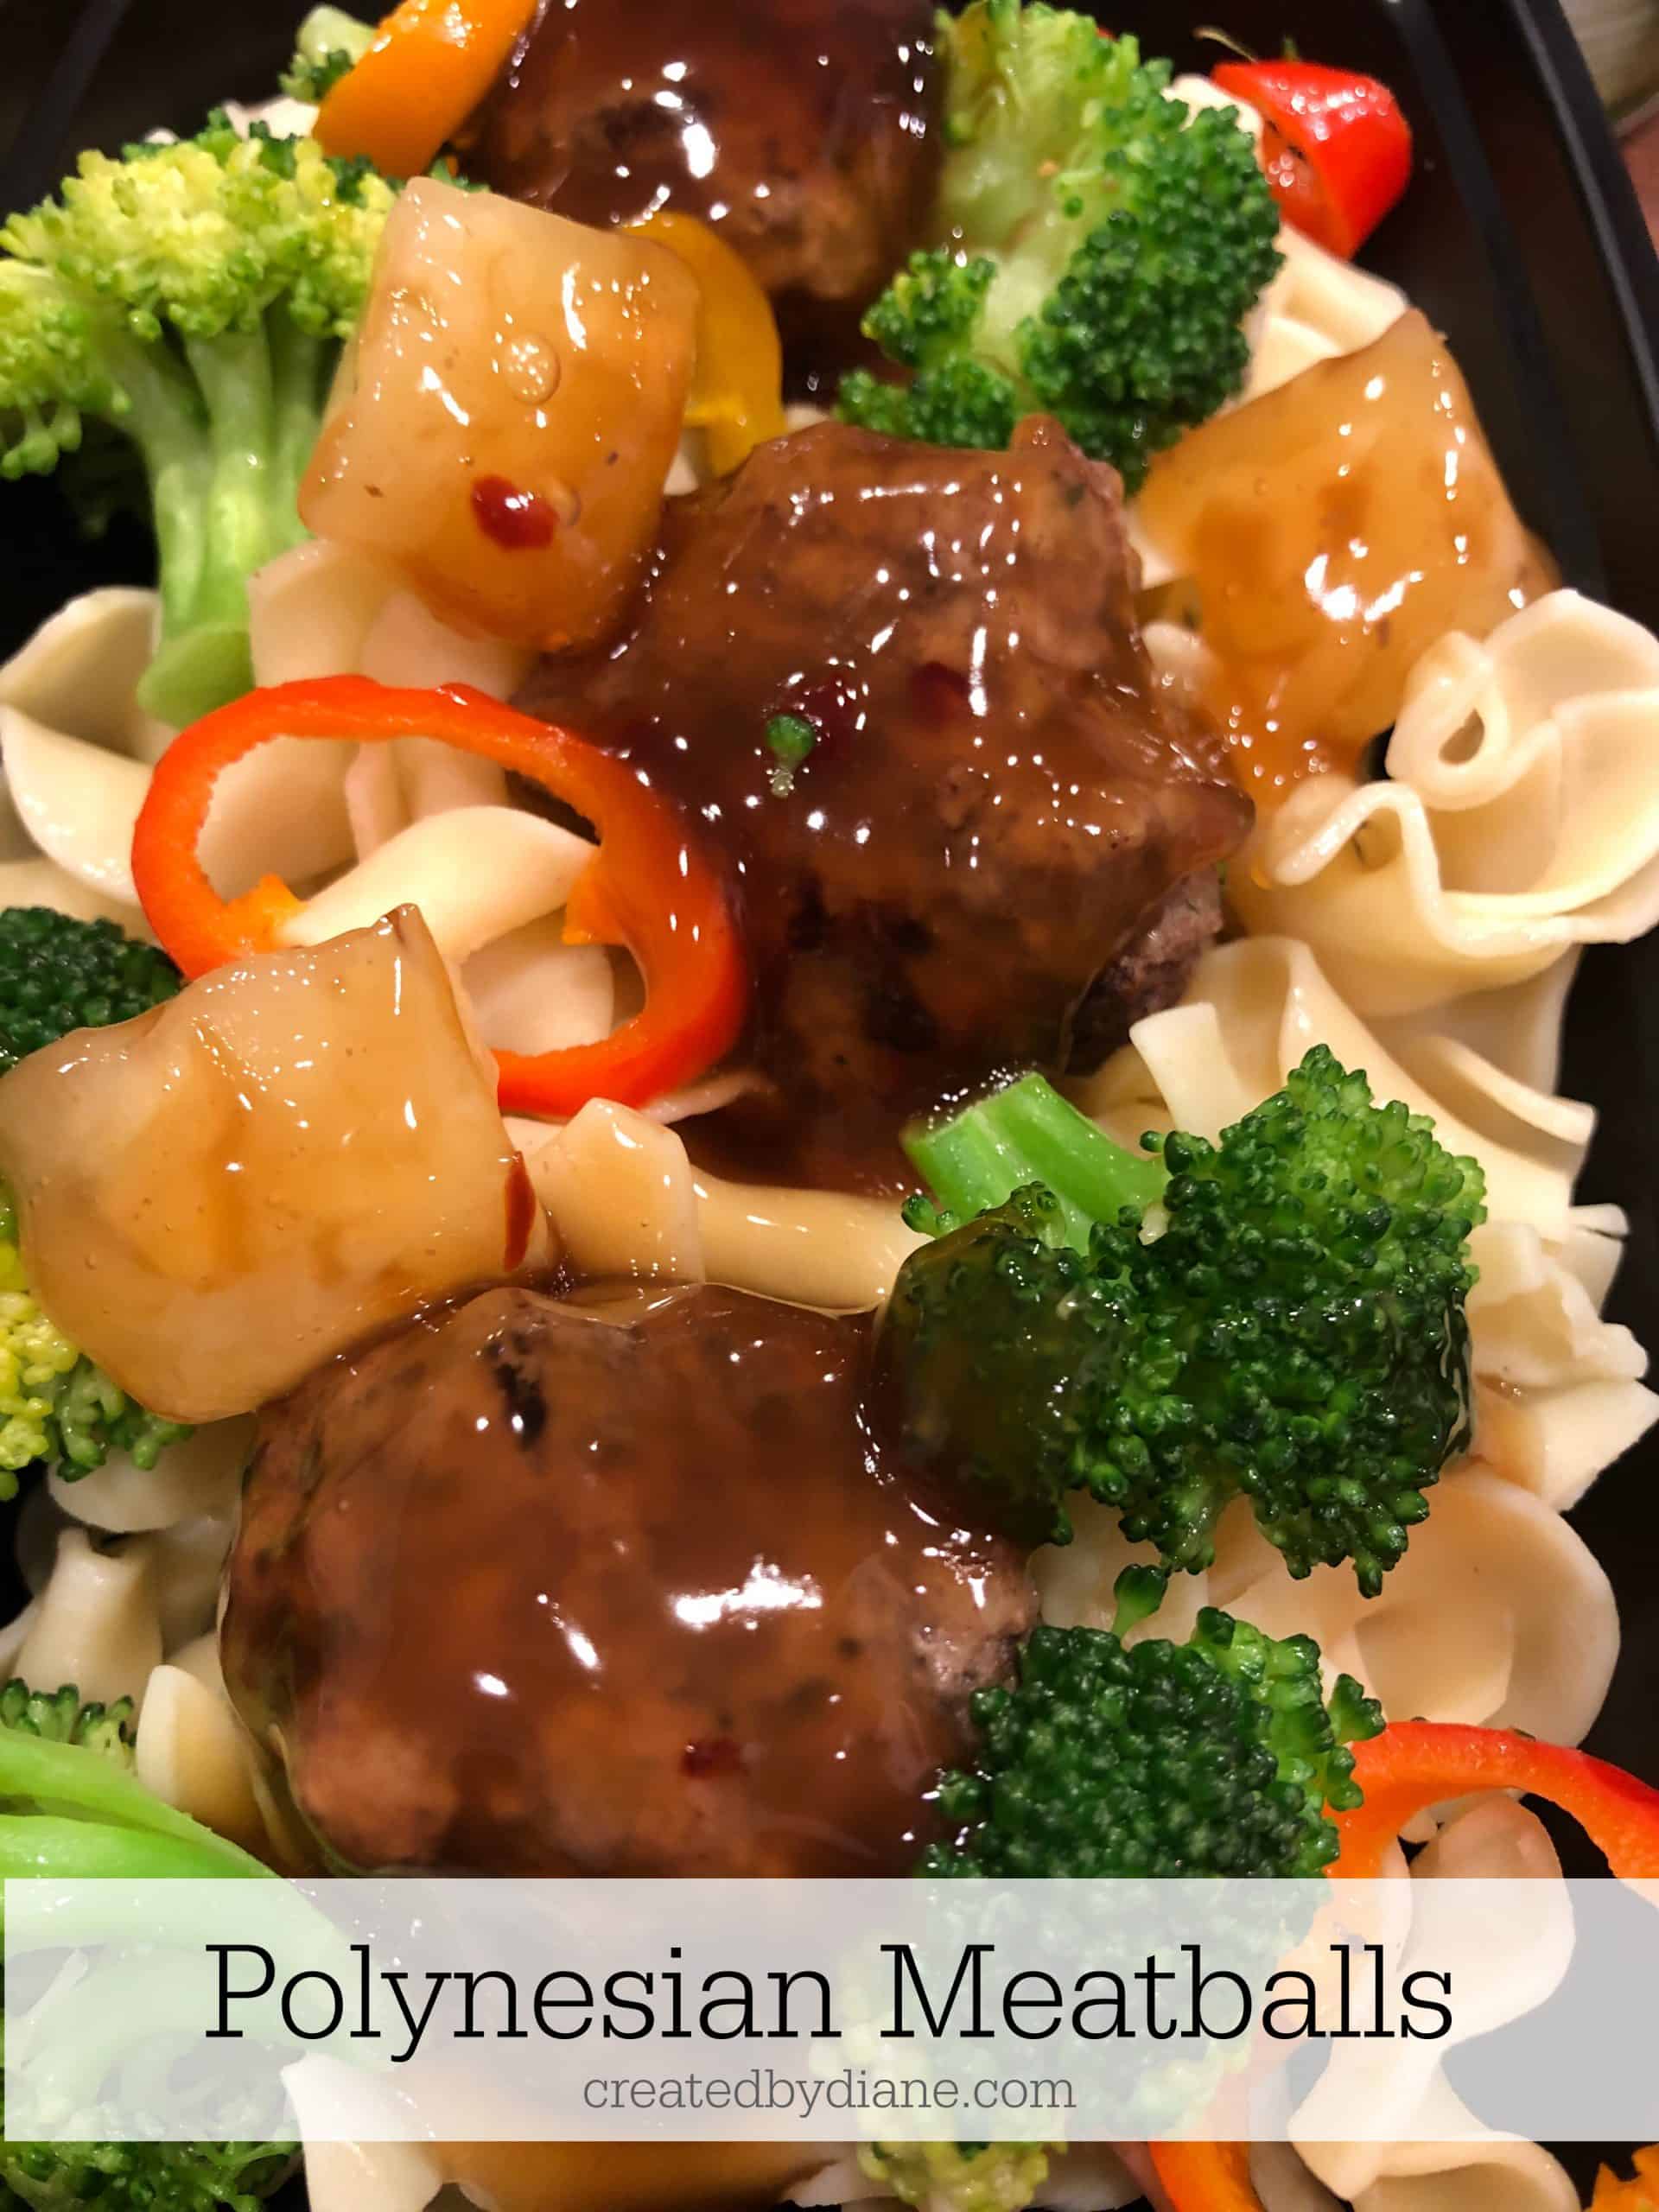 Polynesian (sweet and sour) meatballs with egg noodles